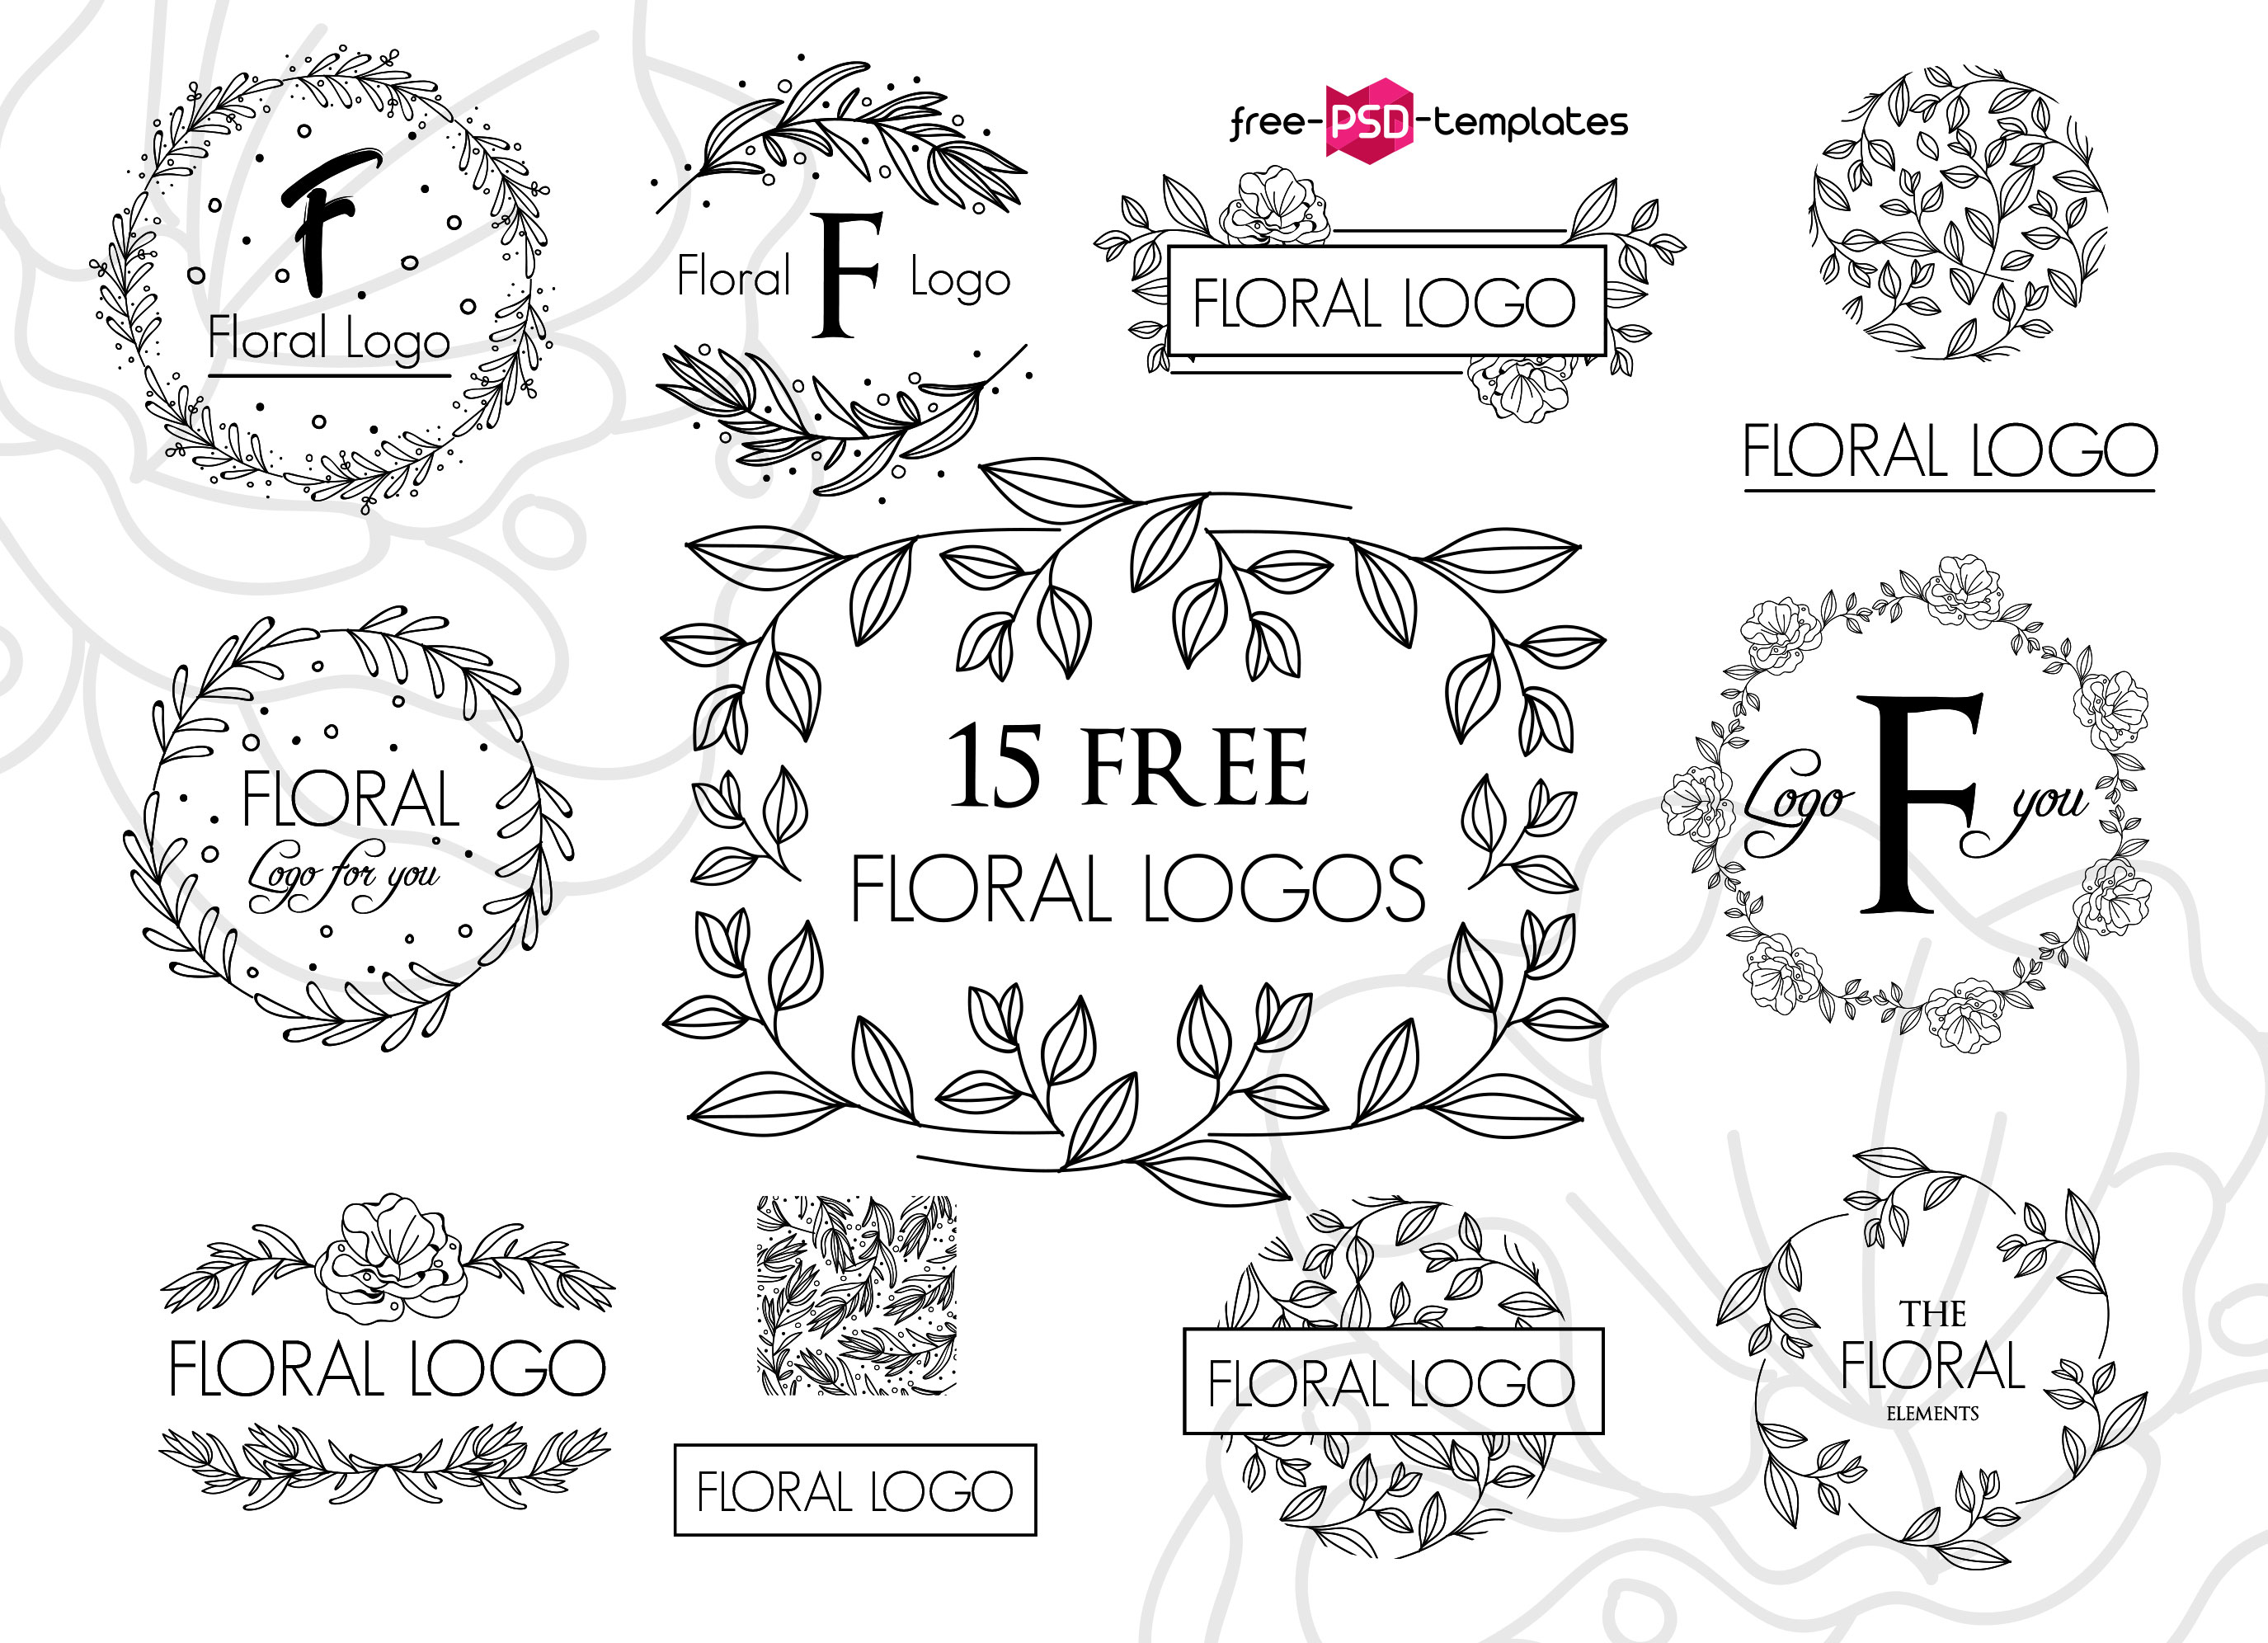 Download 86 Absolutely Free Logos Templates For Business And Premium Version Free Psd Templates